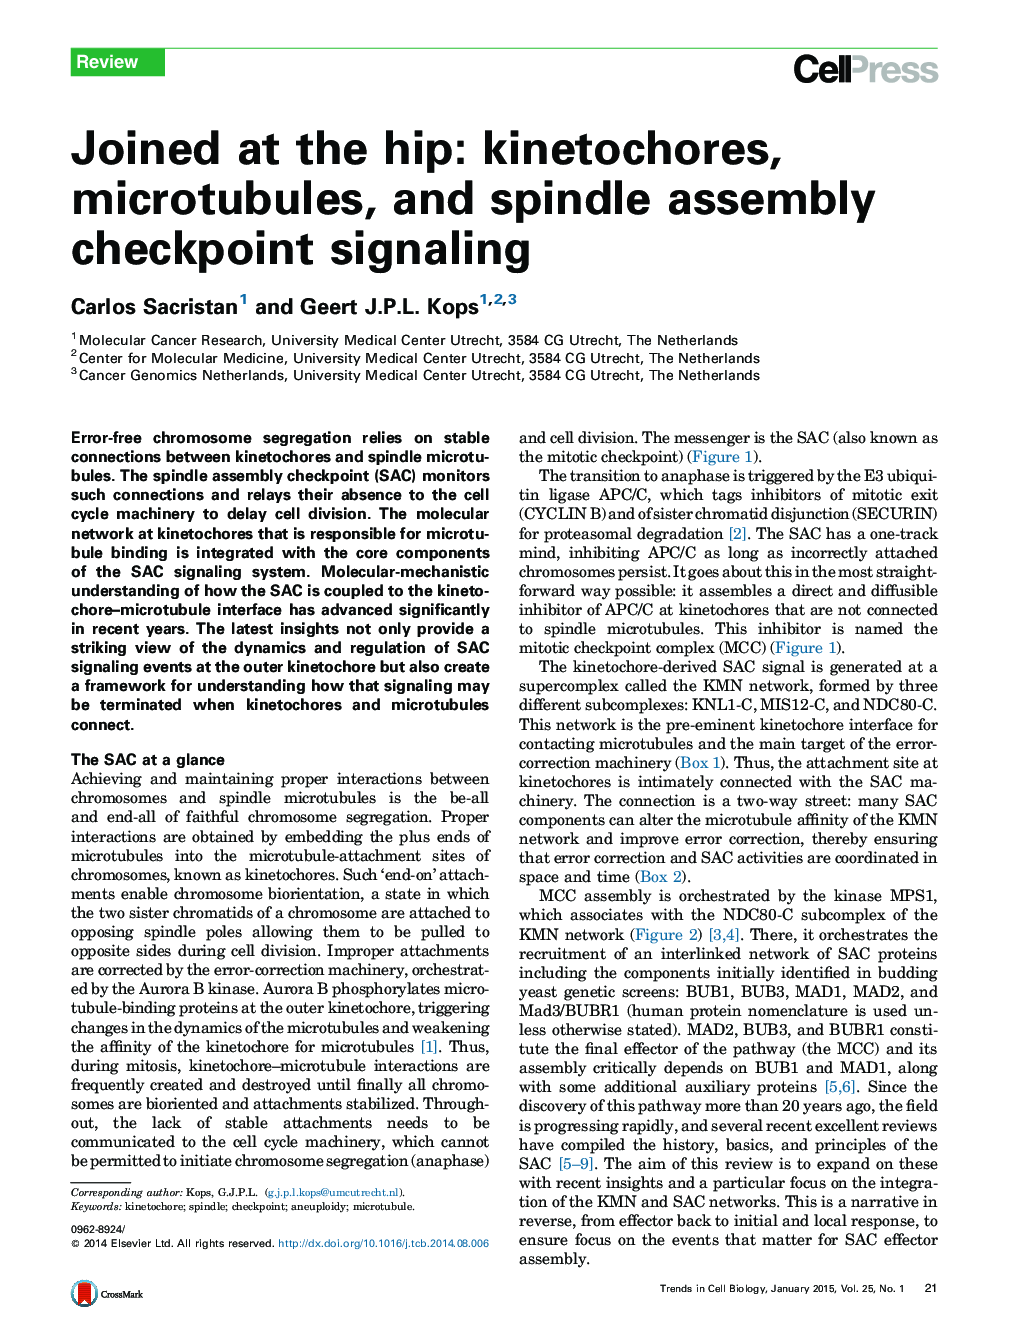 Joined at the hip: kinetochores, microtubules, and spindle assembly checkpoint signaling